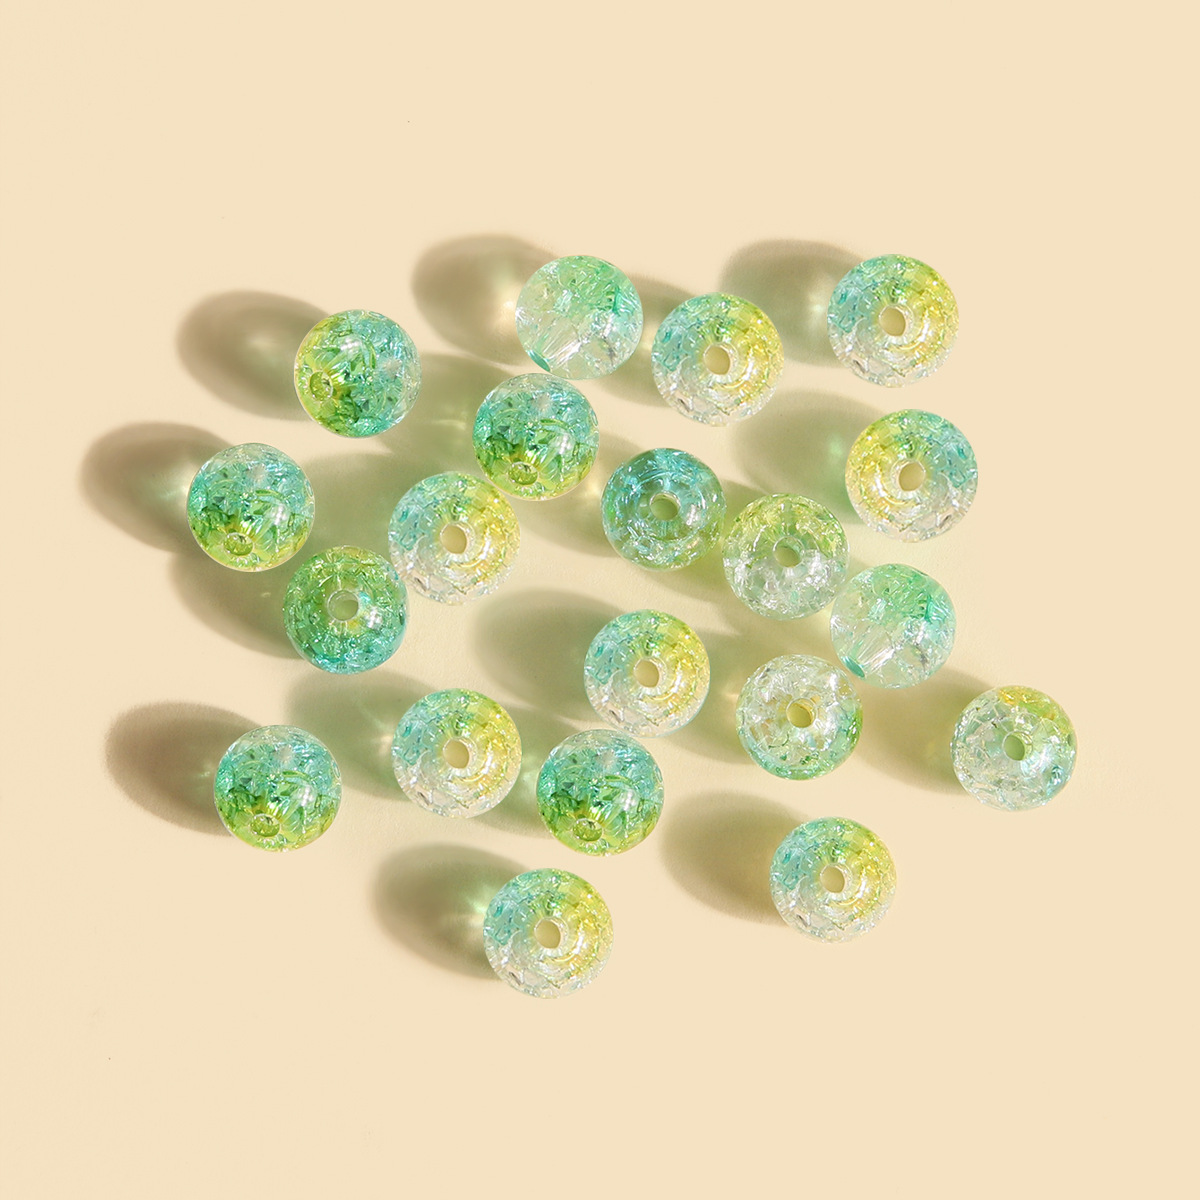 20mm Glow in the Dark Beads 20pc